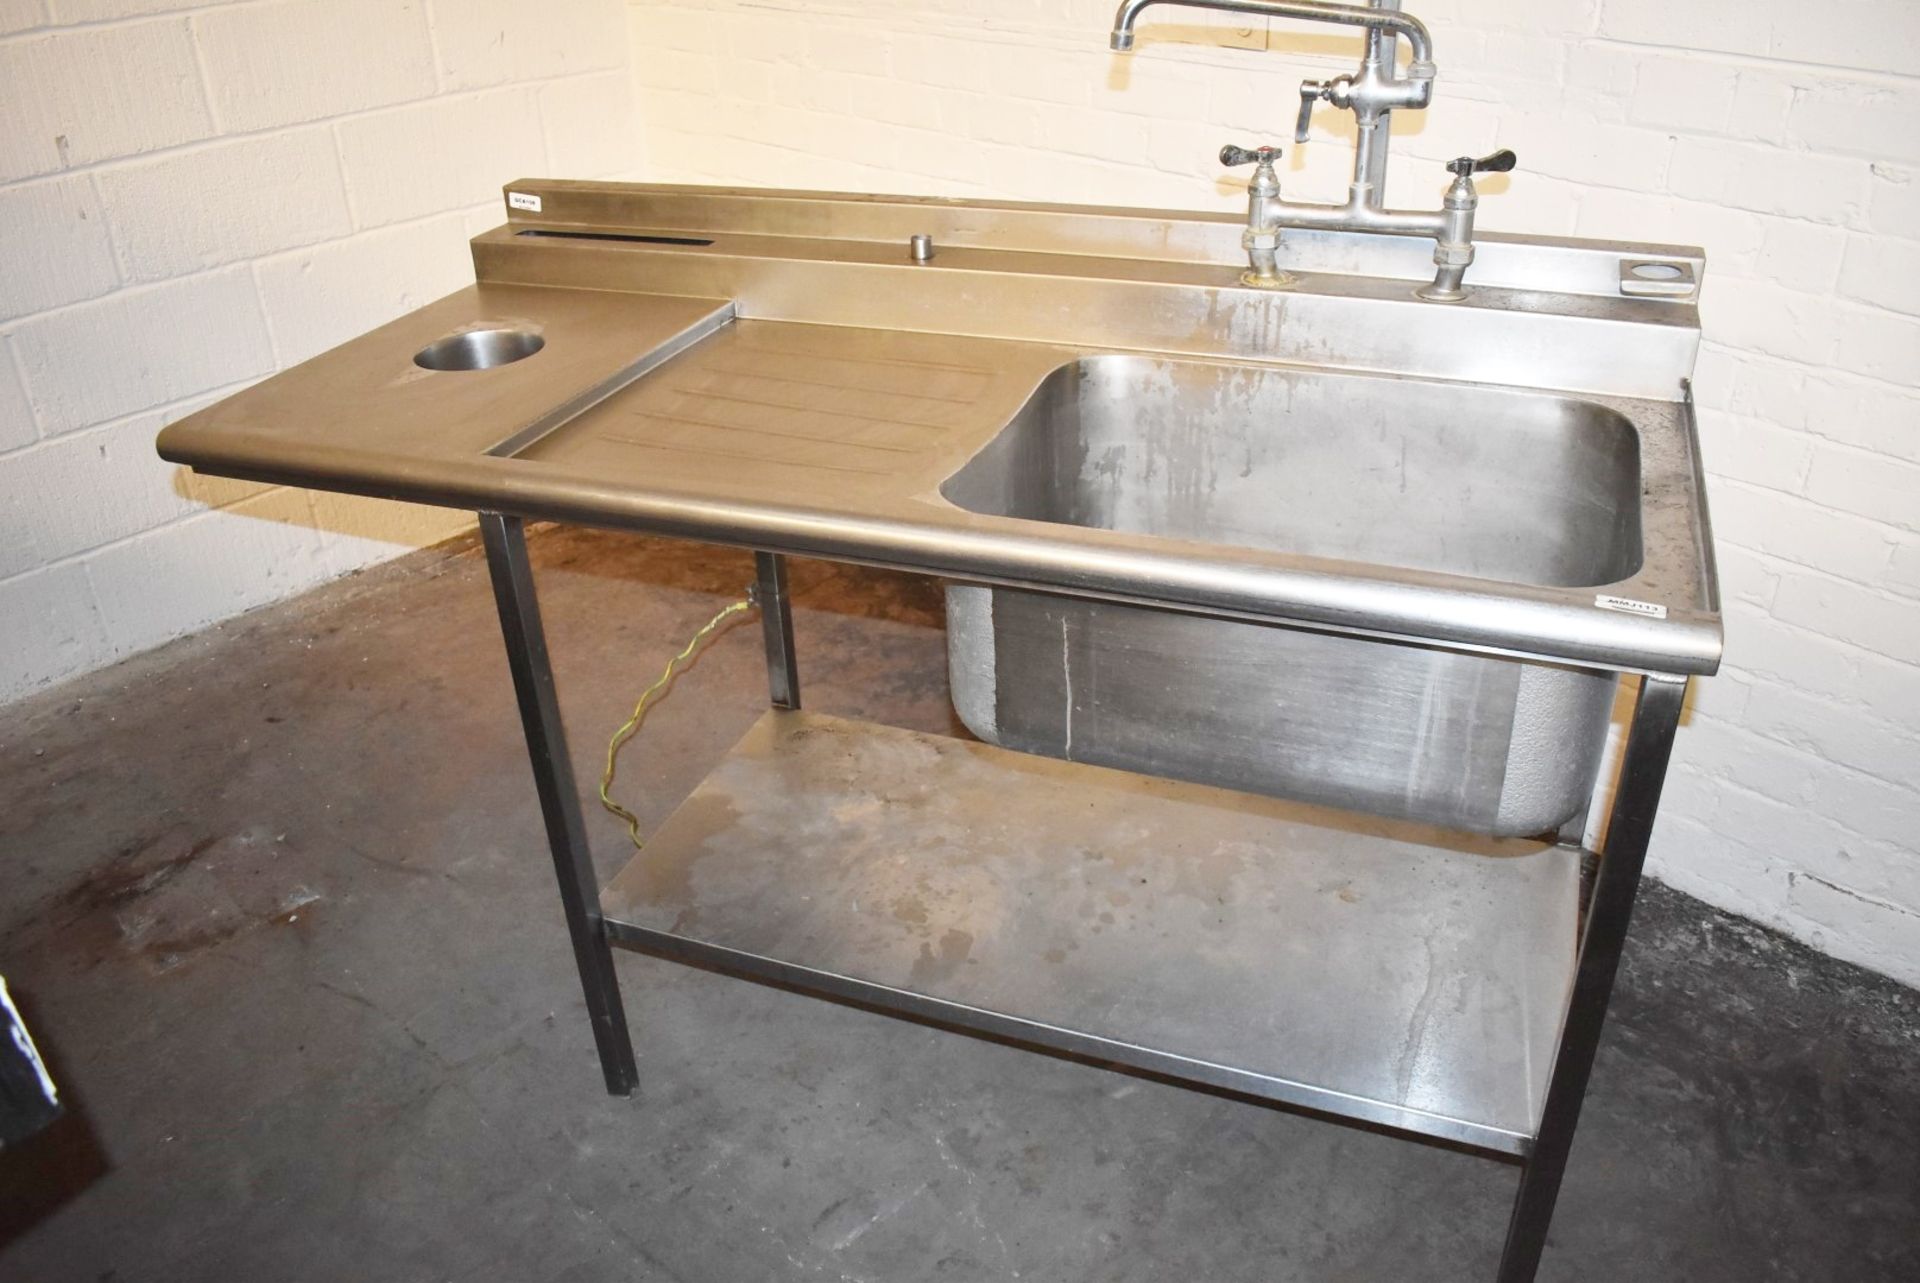 1 x Stainless Steel Single Bowl Sink Unit With Mixer Taps, Spray Hose Tap, Drainer and Bin Chute